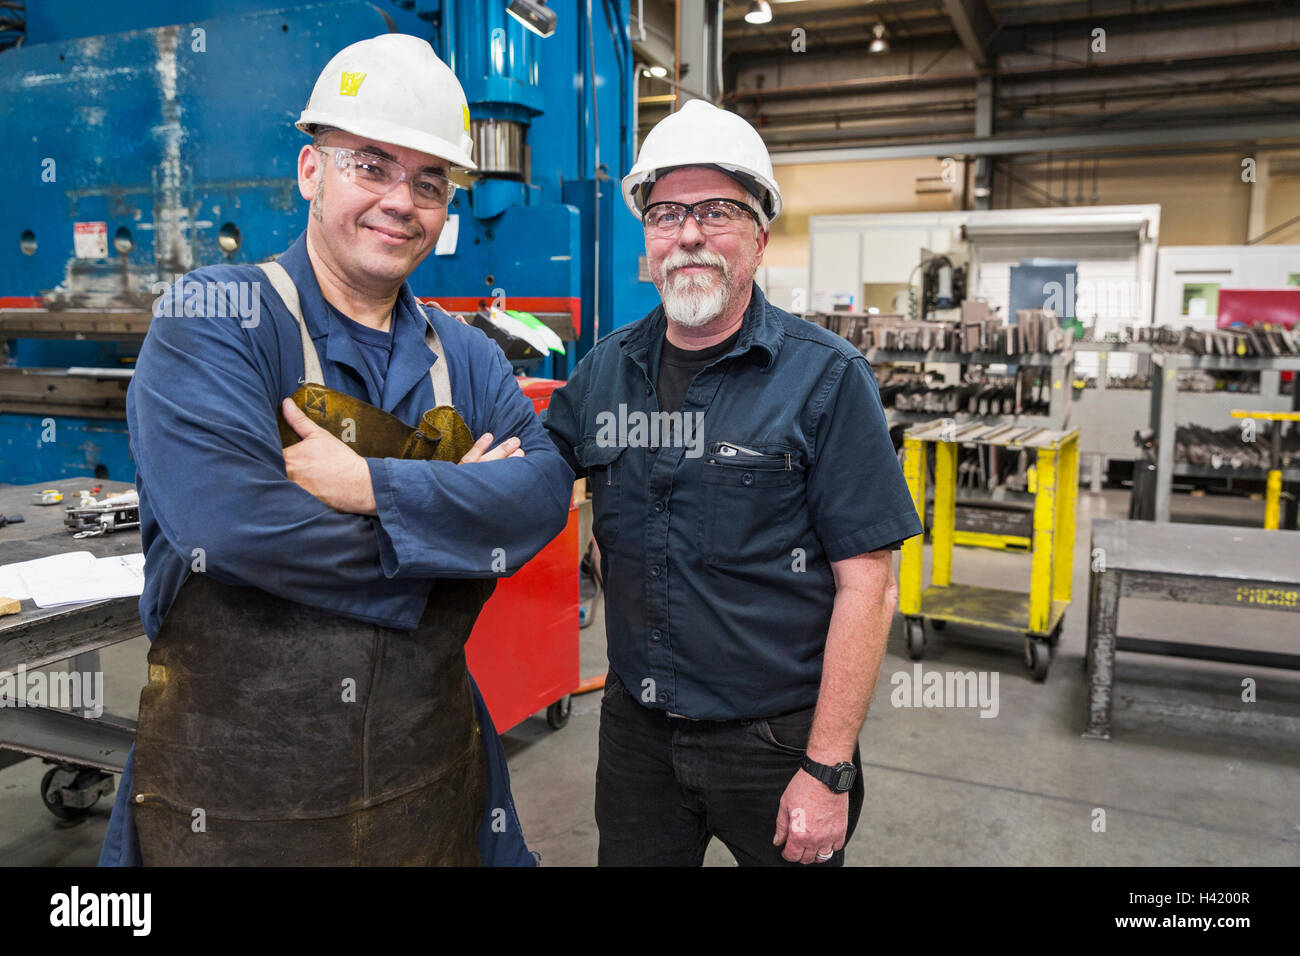 Smiling workers posing in factory Banque D'Images